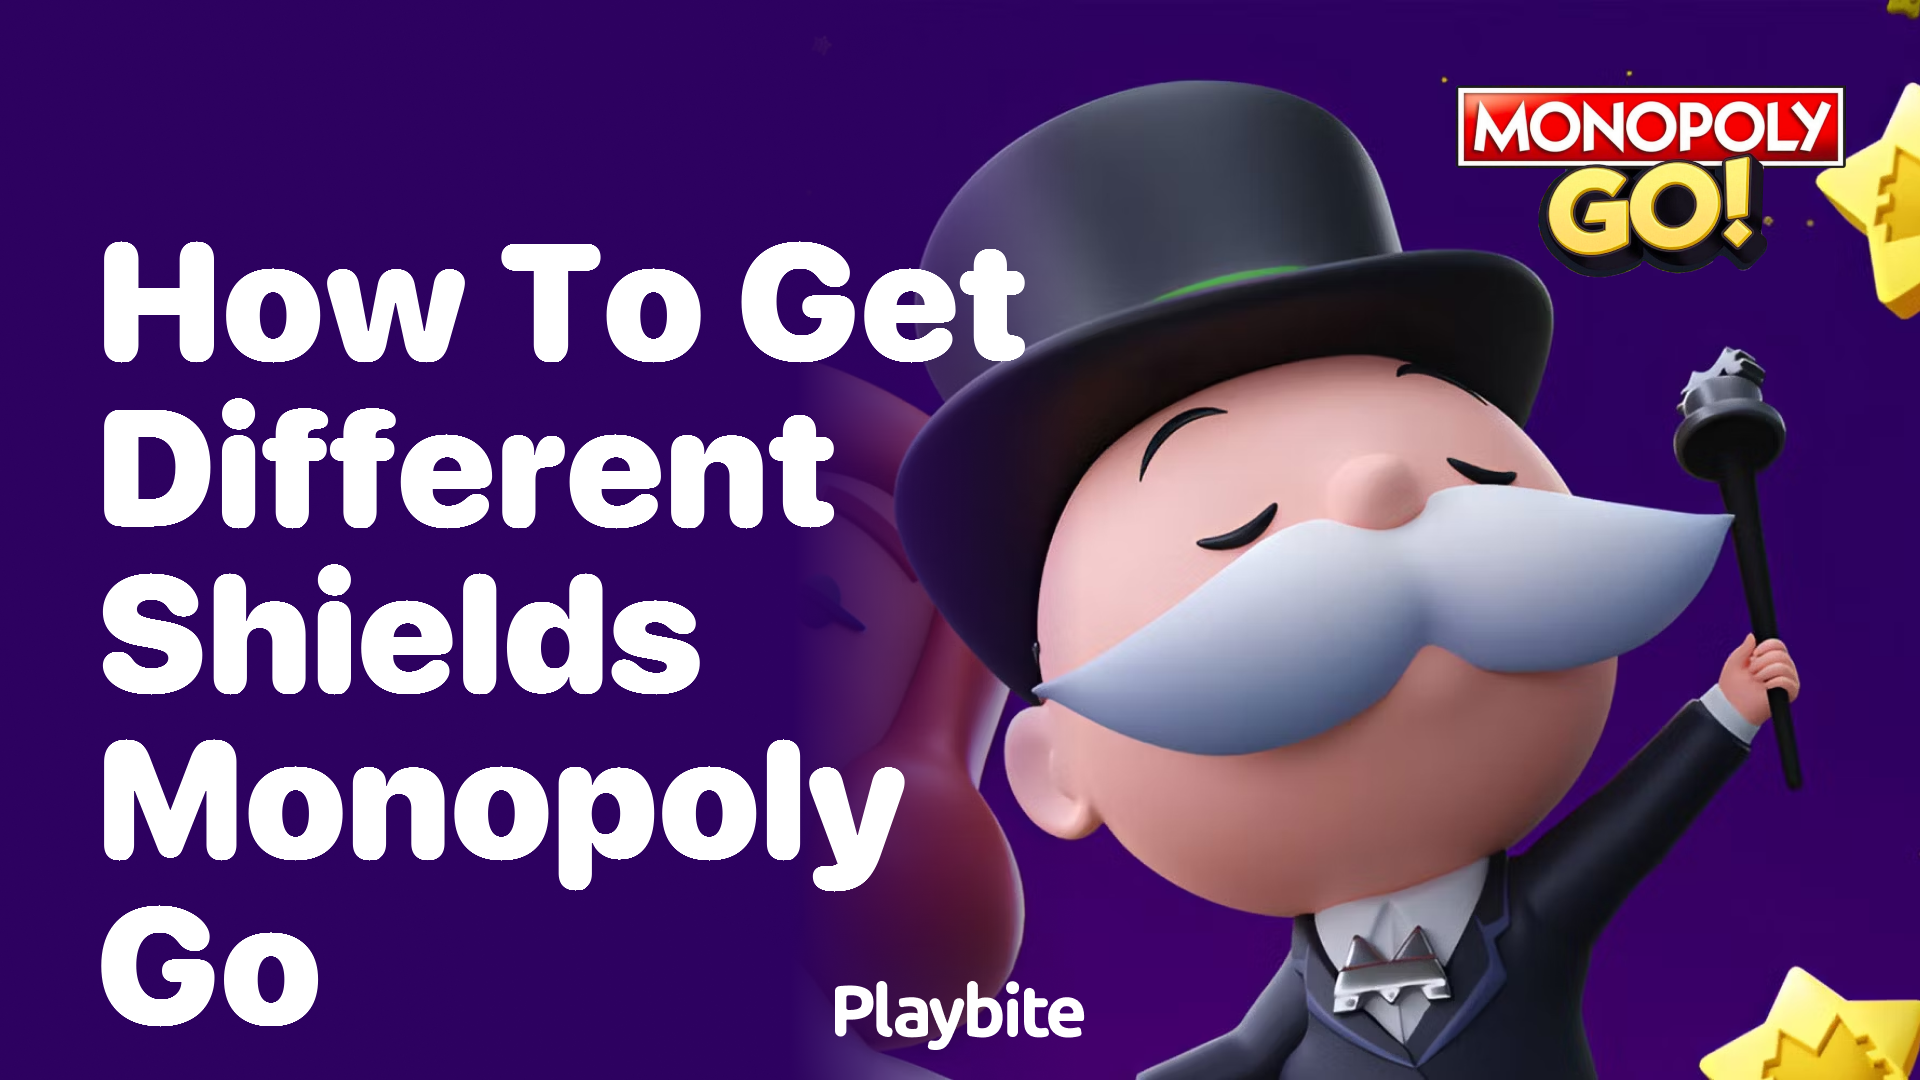 How to Get Different Shields in Monopoly Go